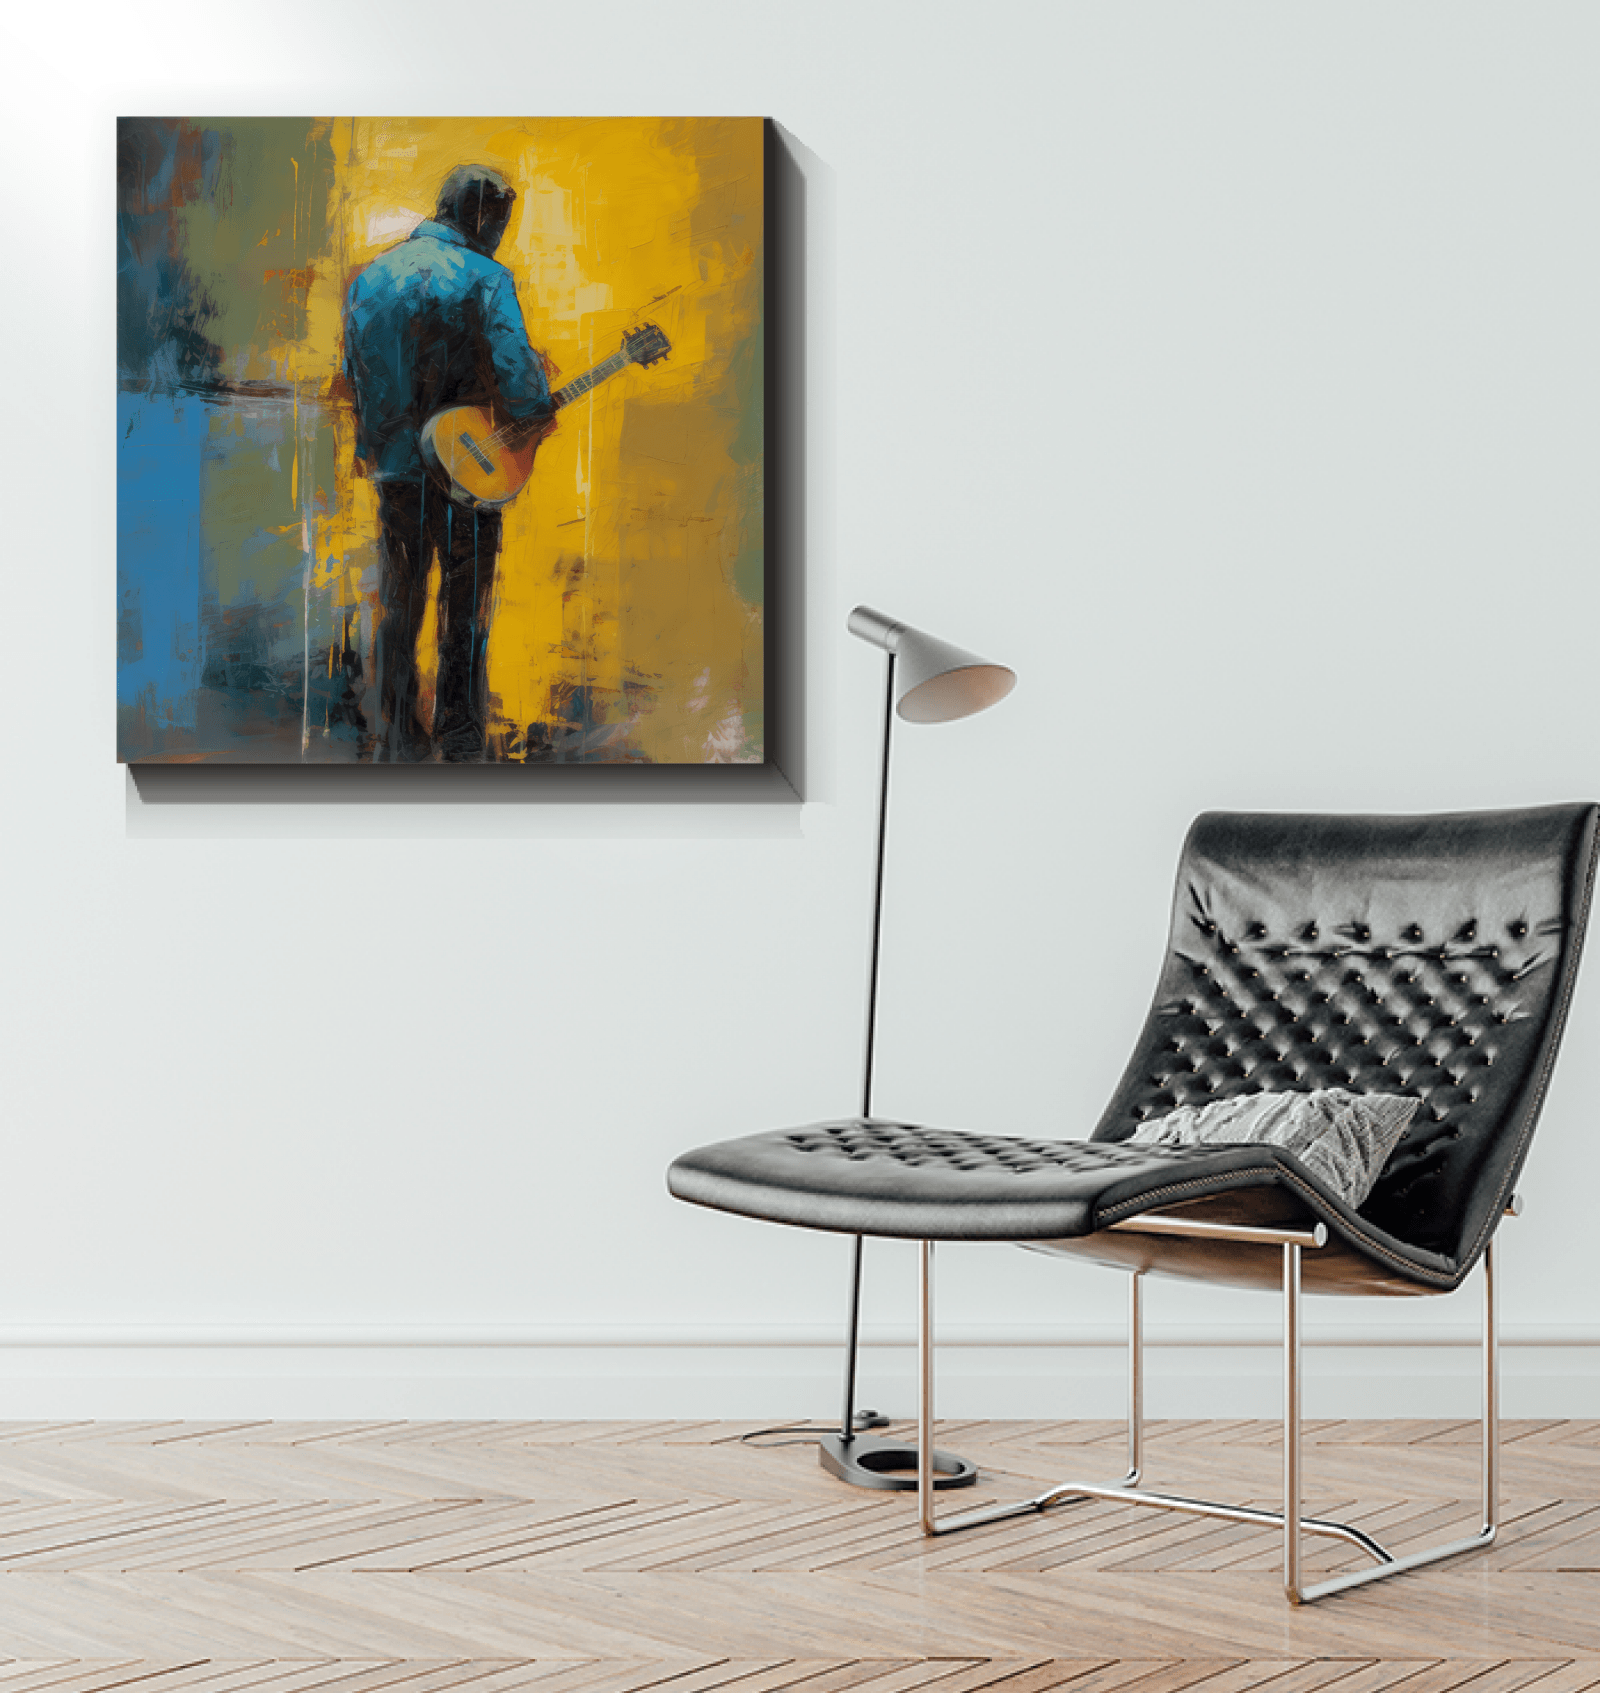 Virtuoso Vibe wrapped canvas, perfect blend of colors and textures.